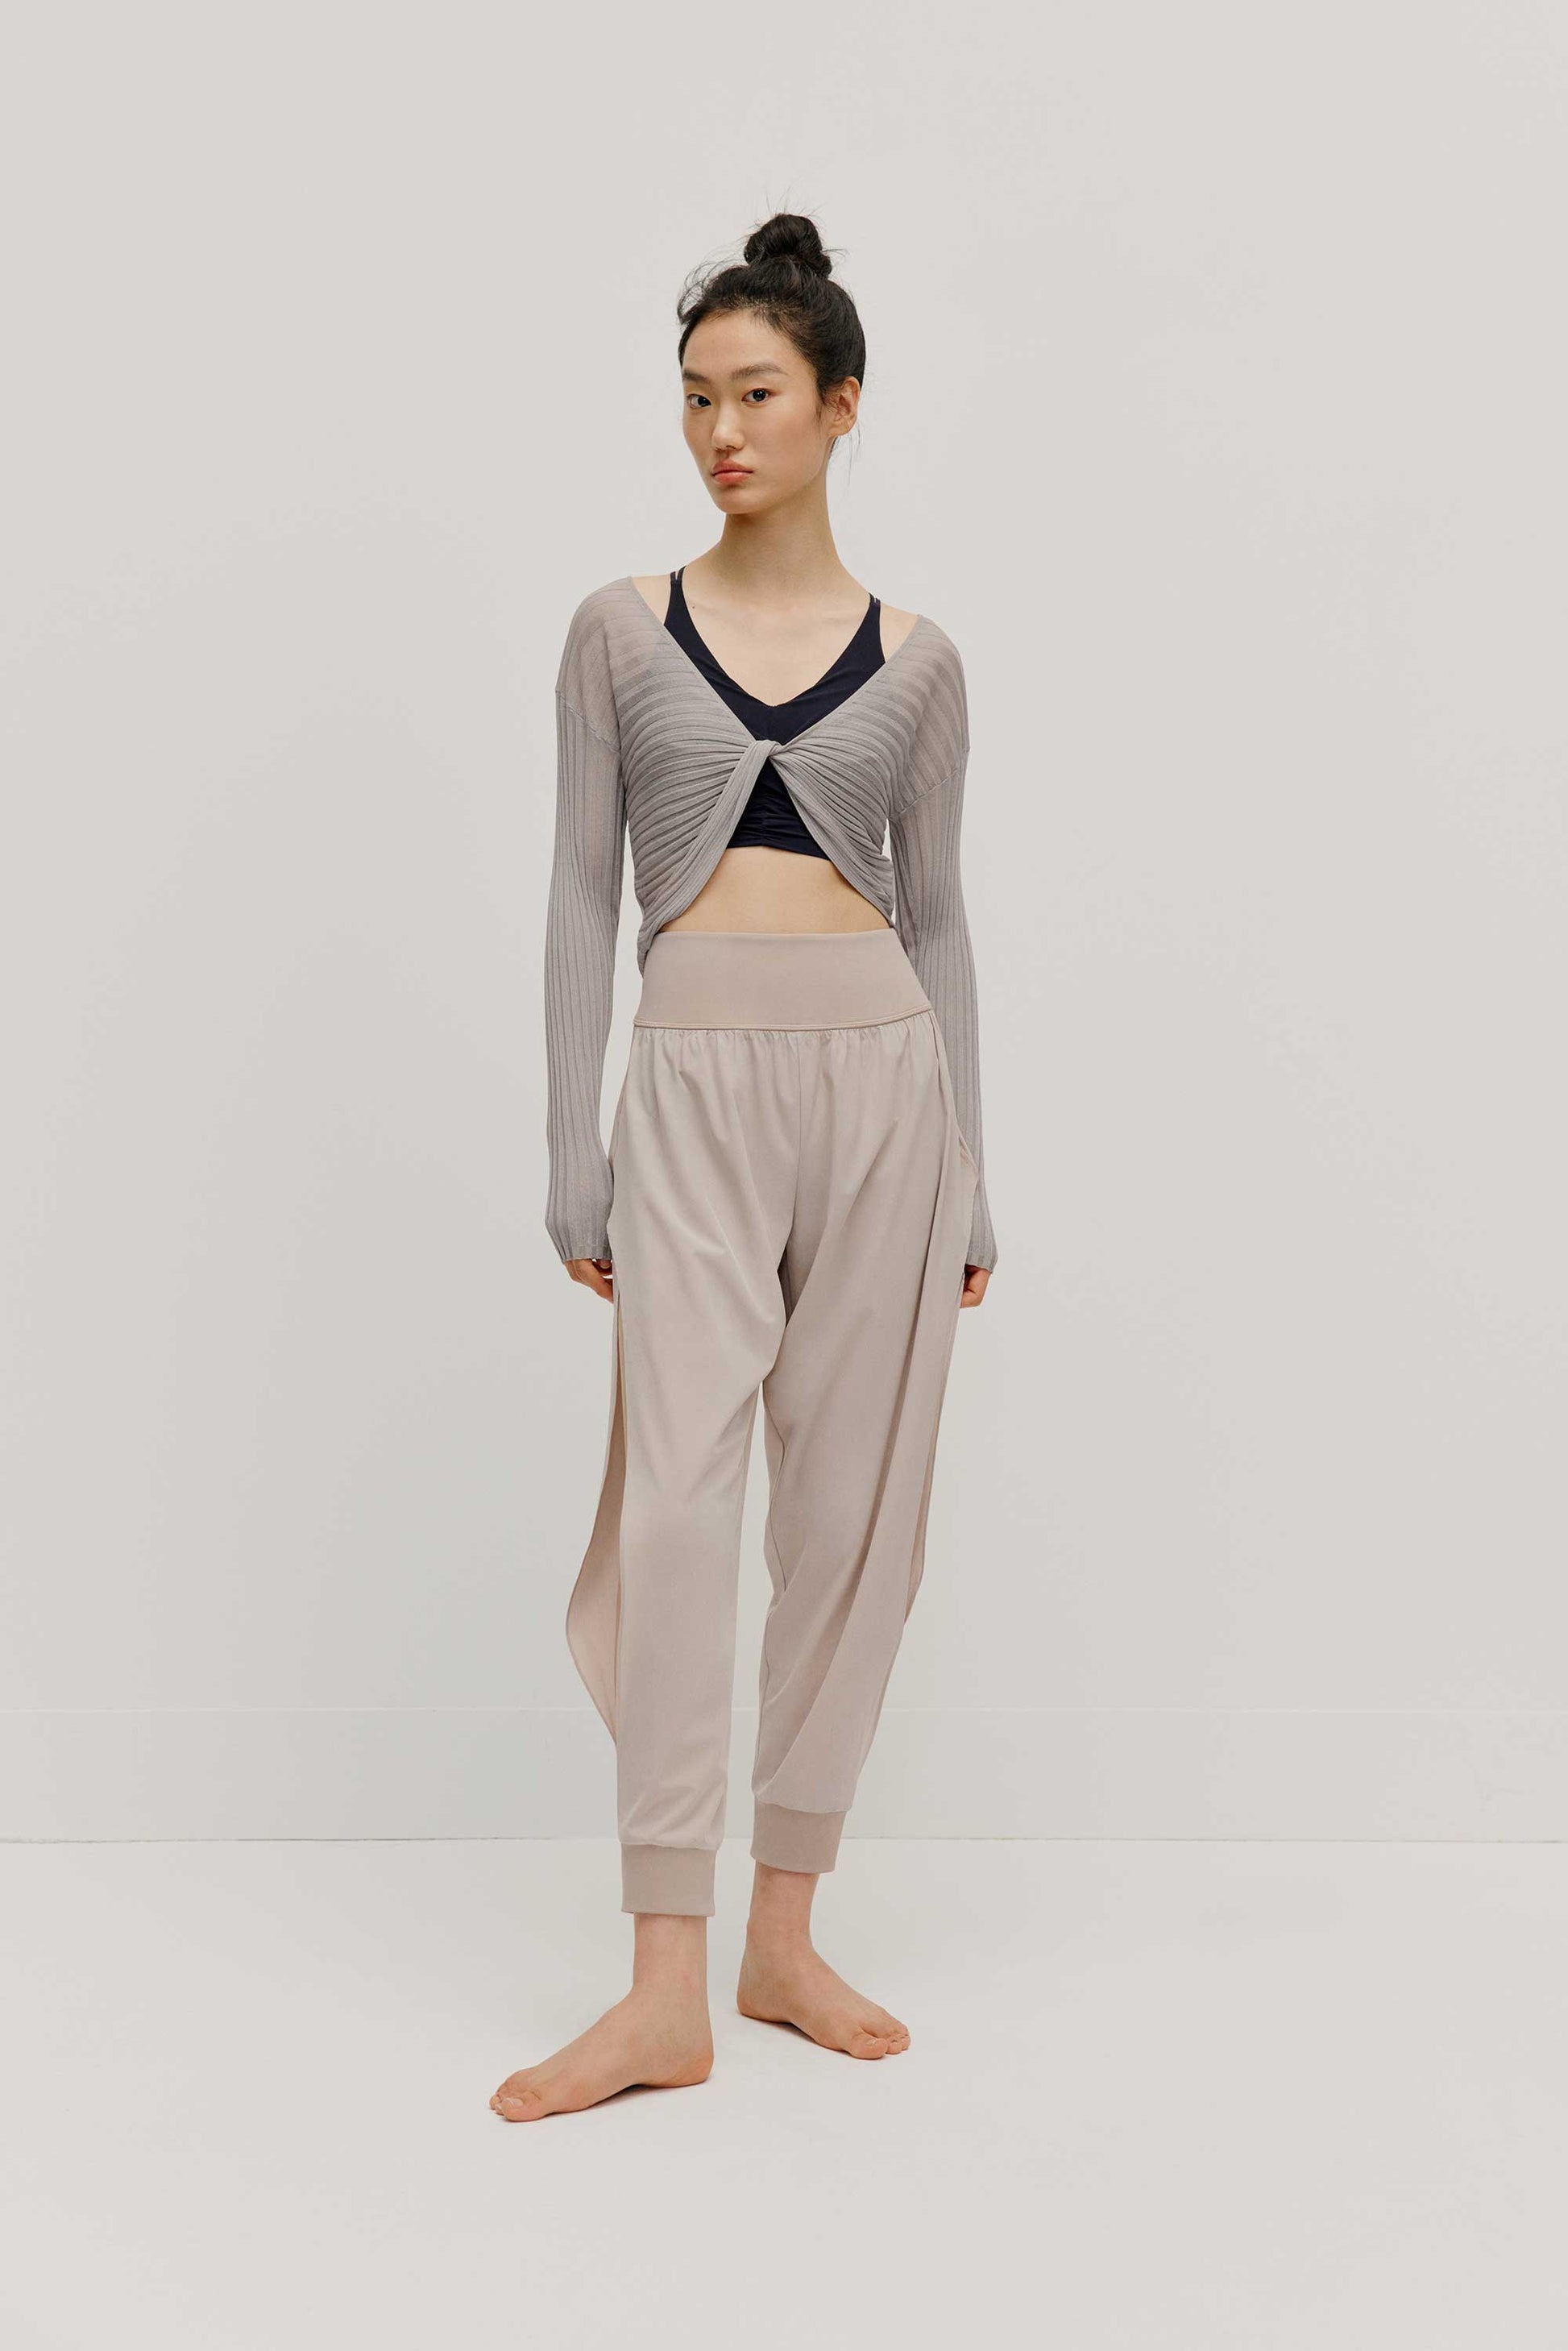 a full body front view of a women wearing a neutral color woven jogger with side slits and a navy bra covered by a mauve color see thru knit top.